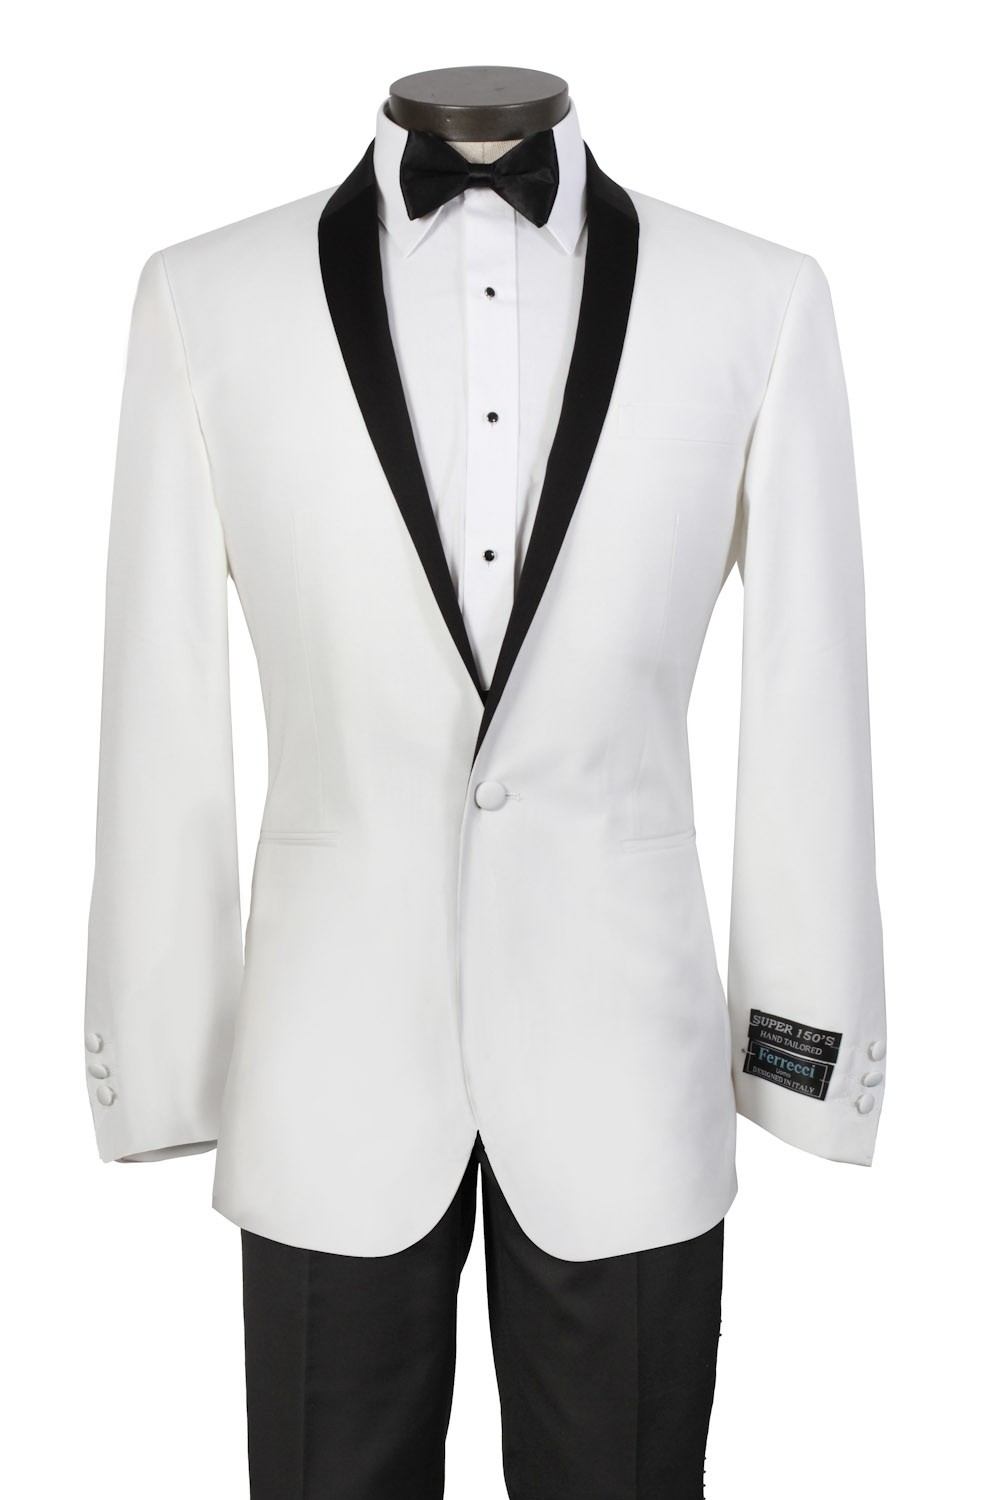 White Tuxedo With Black Shawl Lapel   Includes Black Trousers